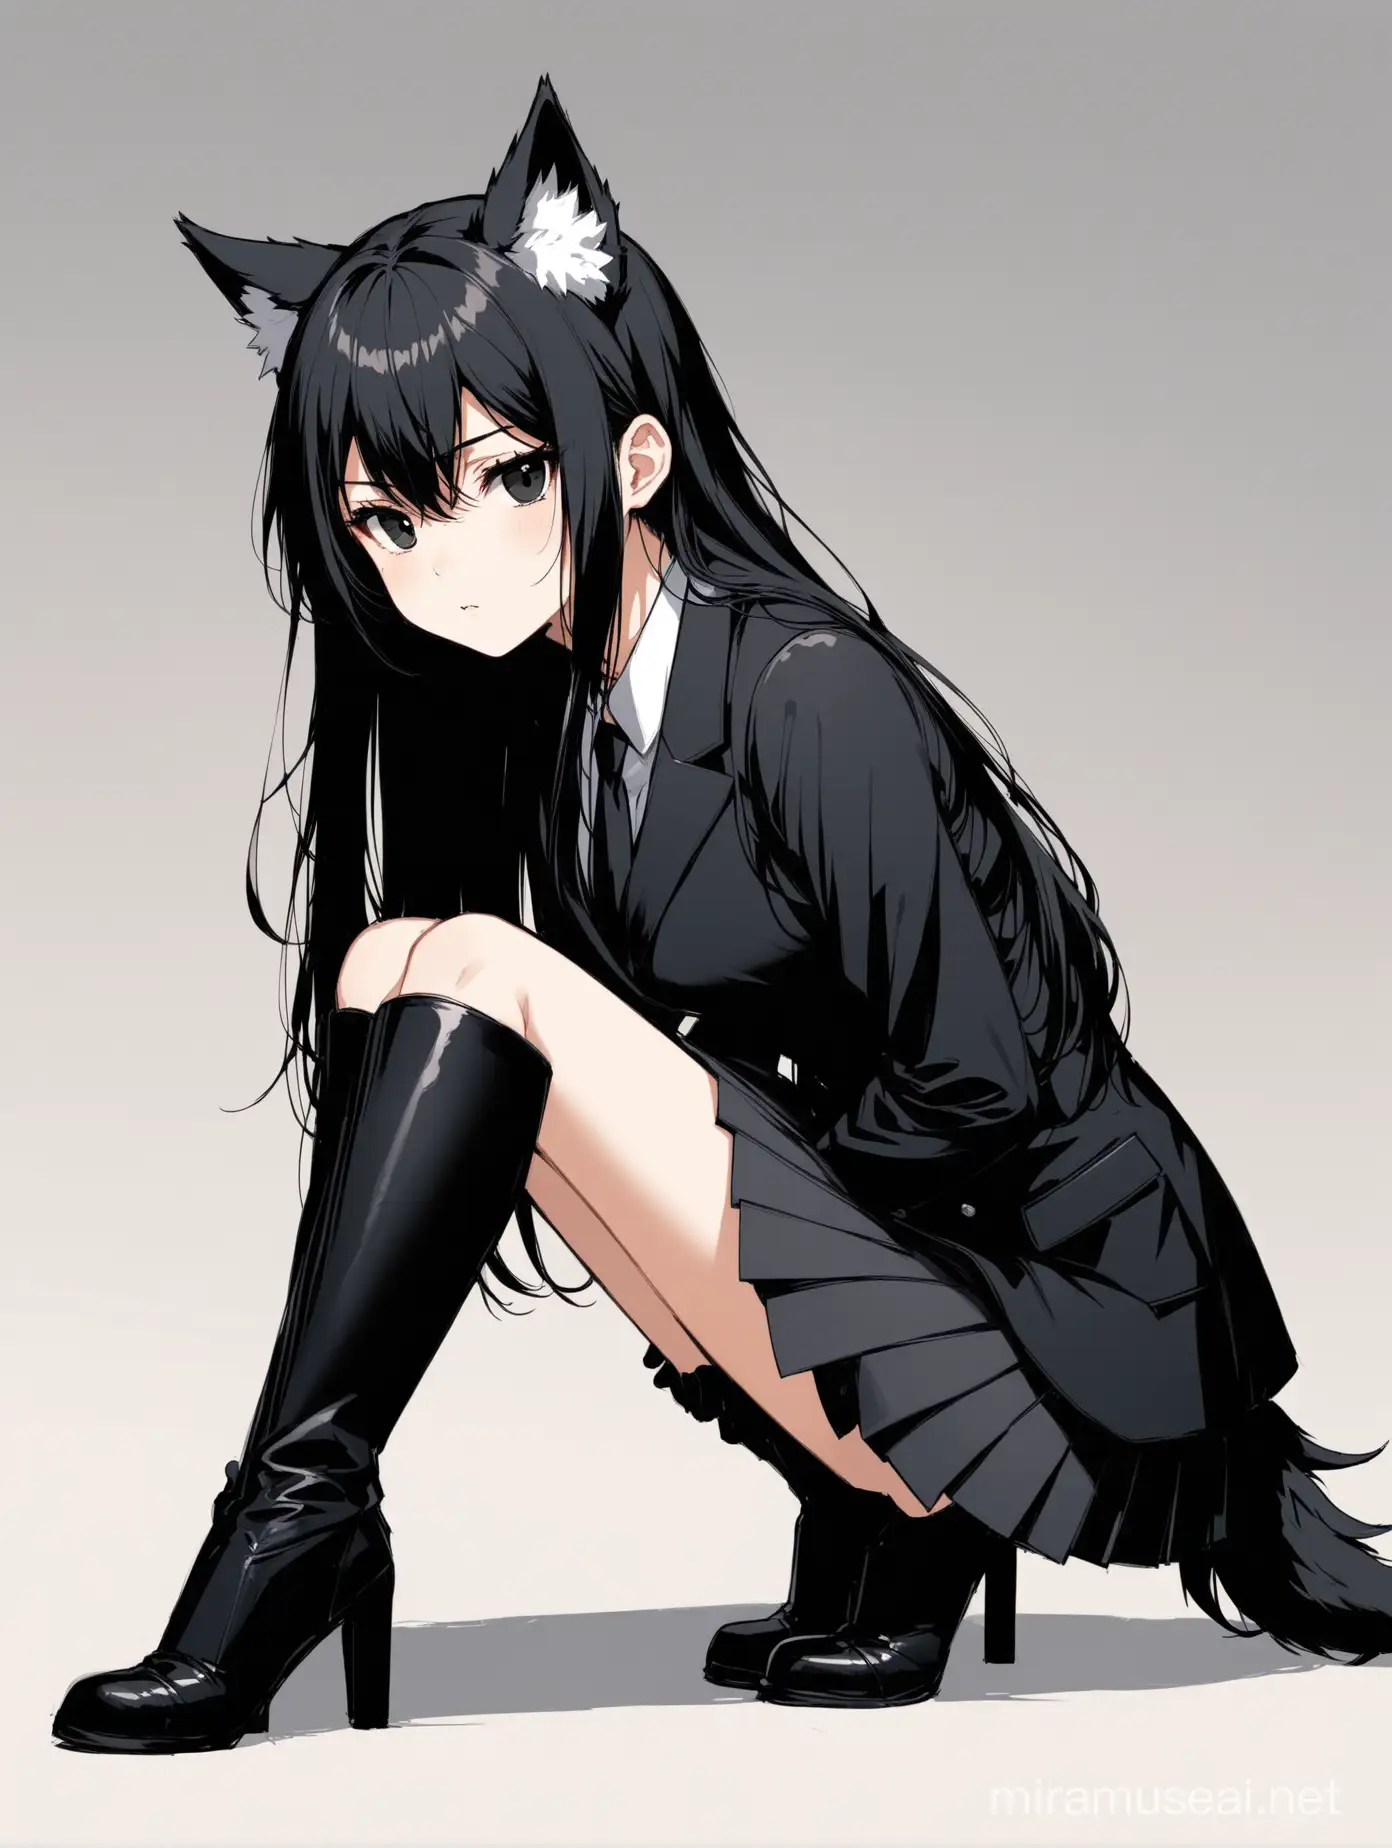 full body view, tall girl, wolf girl, wolf ears, white ear tufts, black eyes, long hair, black hair, short black suit coat, short black pleated skirt, black gloves, long sleeves, black tall thigh boots, neutral expression, side view, down on knees,